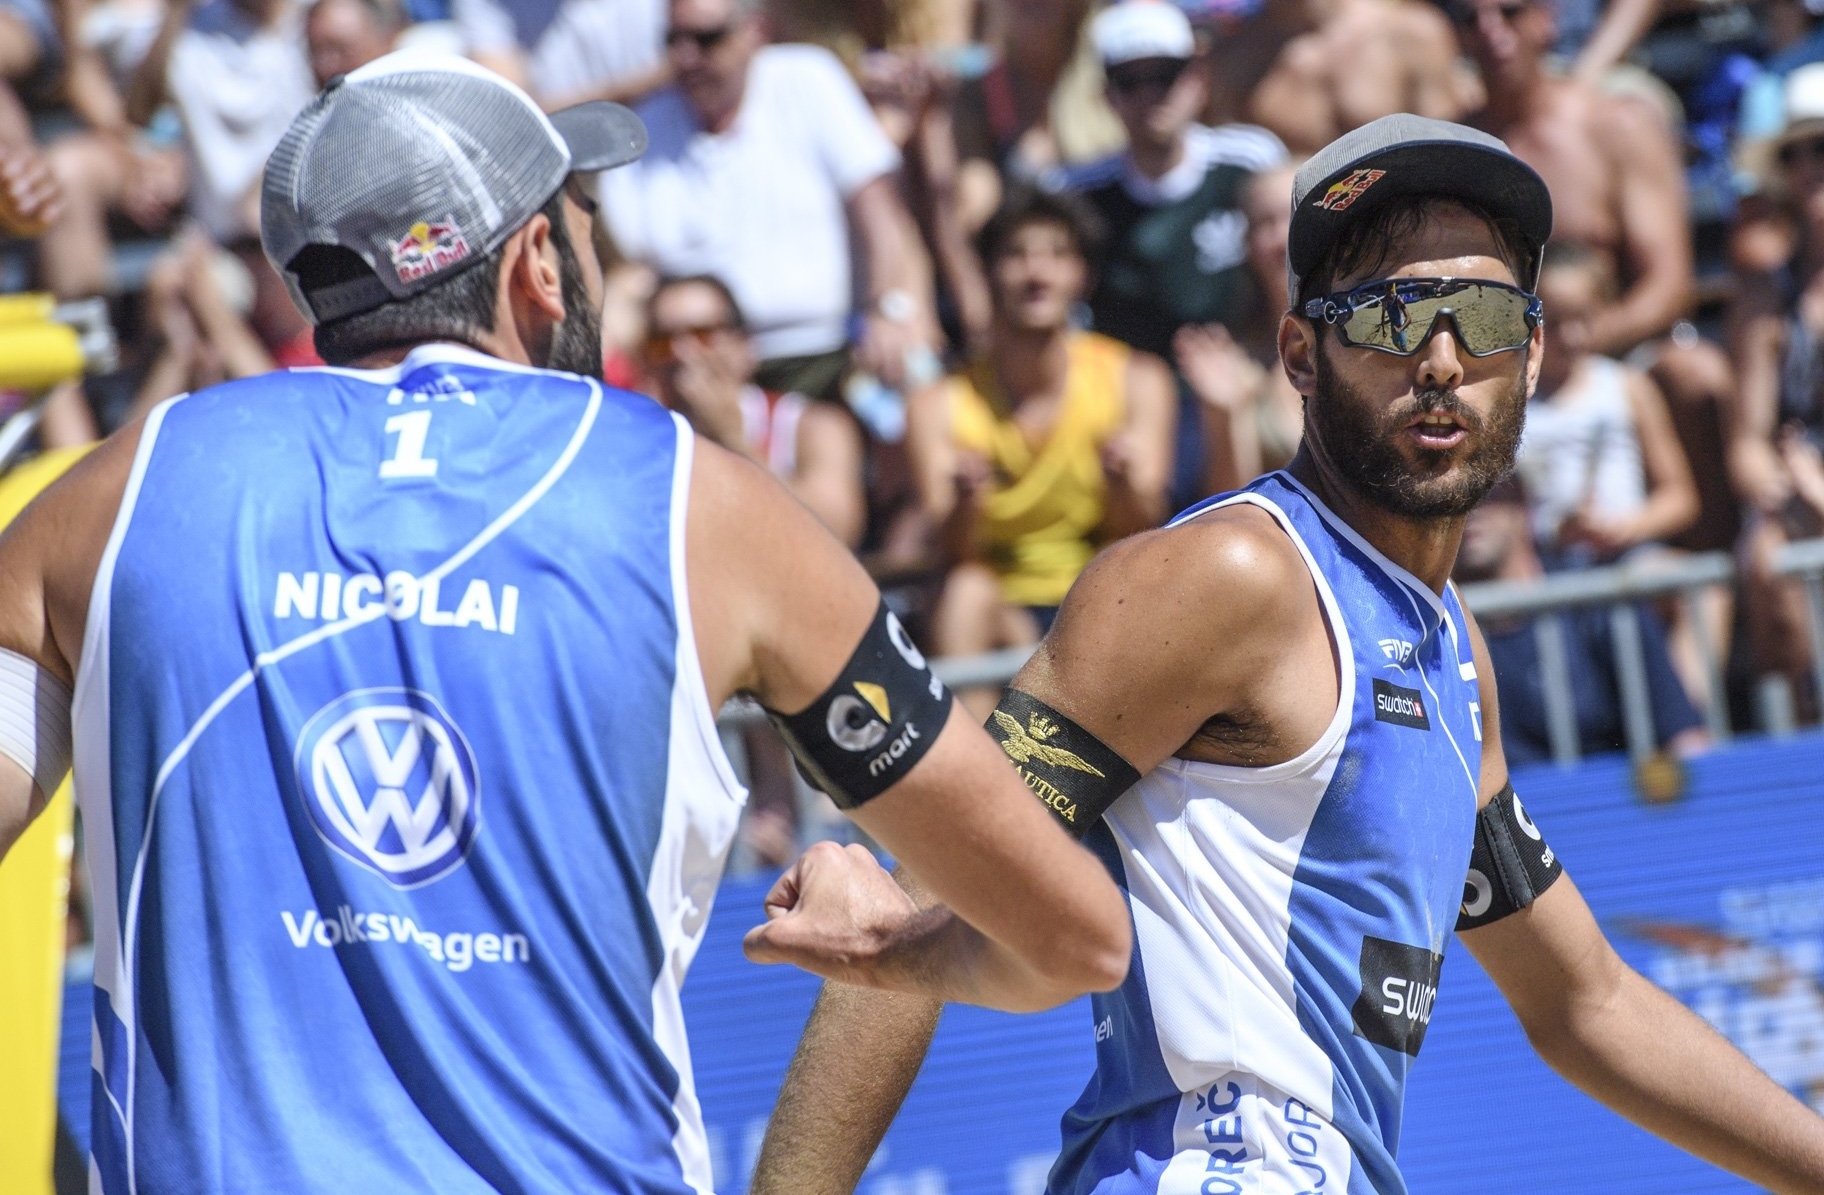 Semifinal-bound Italians Lupo/Nicolai are in red hot form in Poreč 